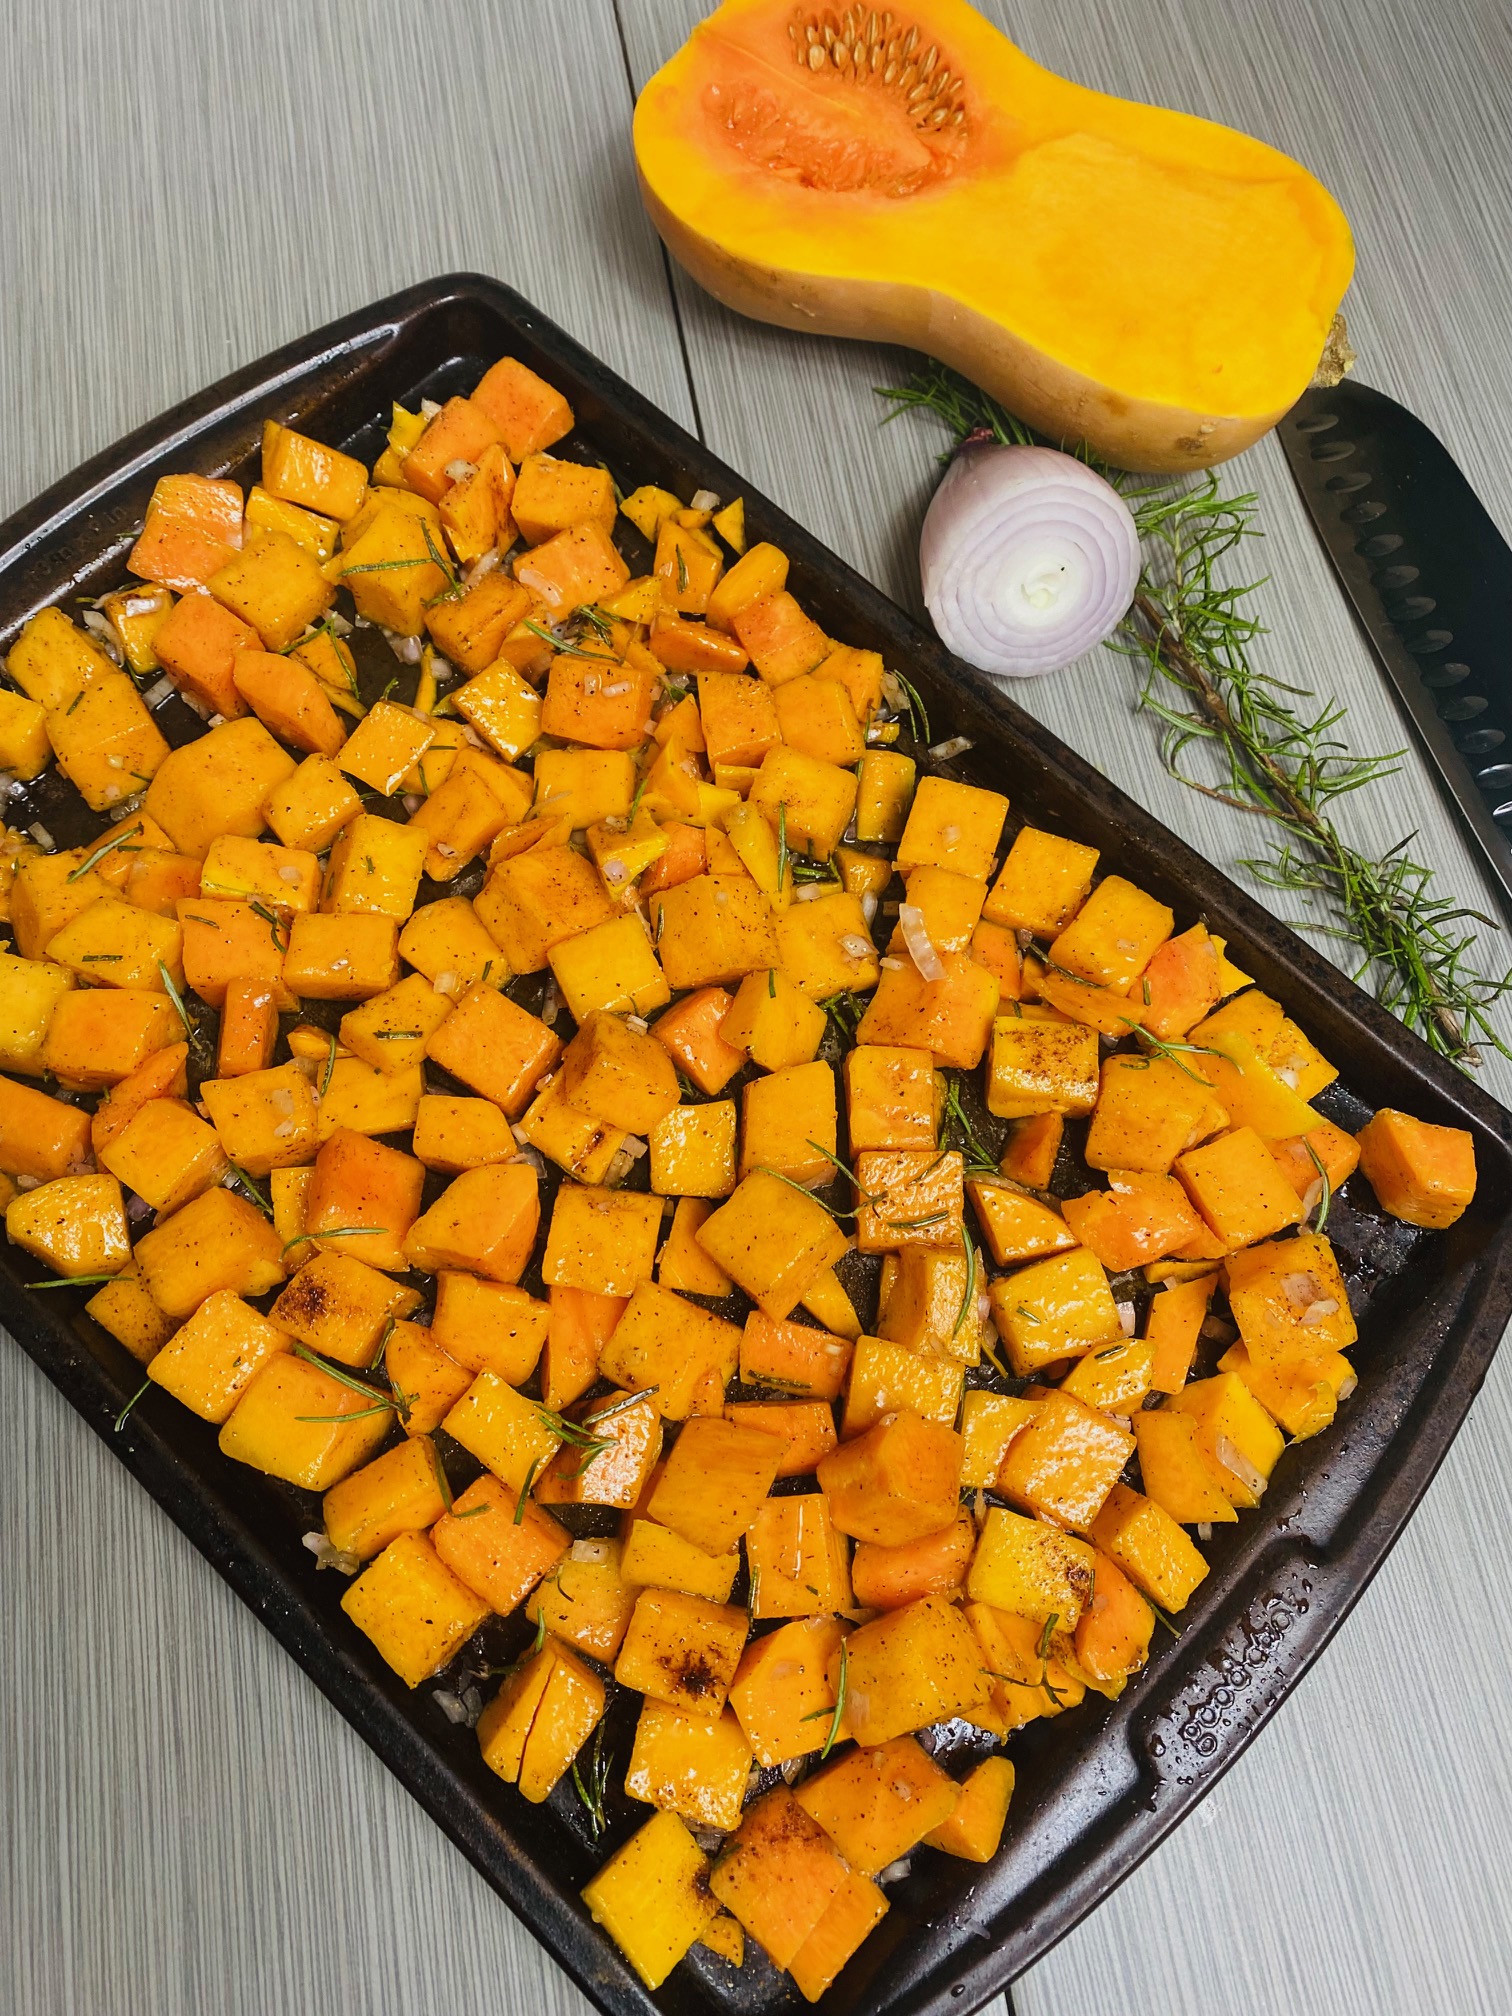 Chopped butternut squash seasoned with olive oil, rosemary, cinnamon, nutmeg, salt, pepper, and shallots on a nonstick baking sheet surrounded by half of a peeled shallot, a sprig of rosemary, half of a butternut squash and a chef's knife against gray tiles